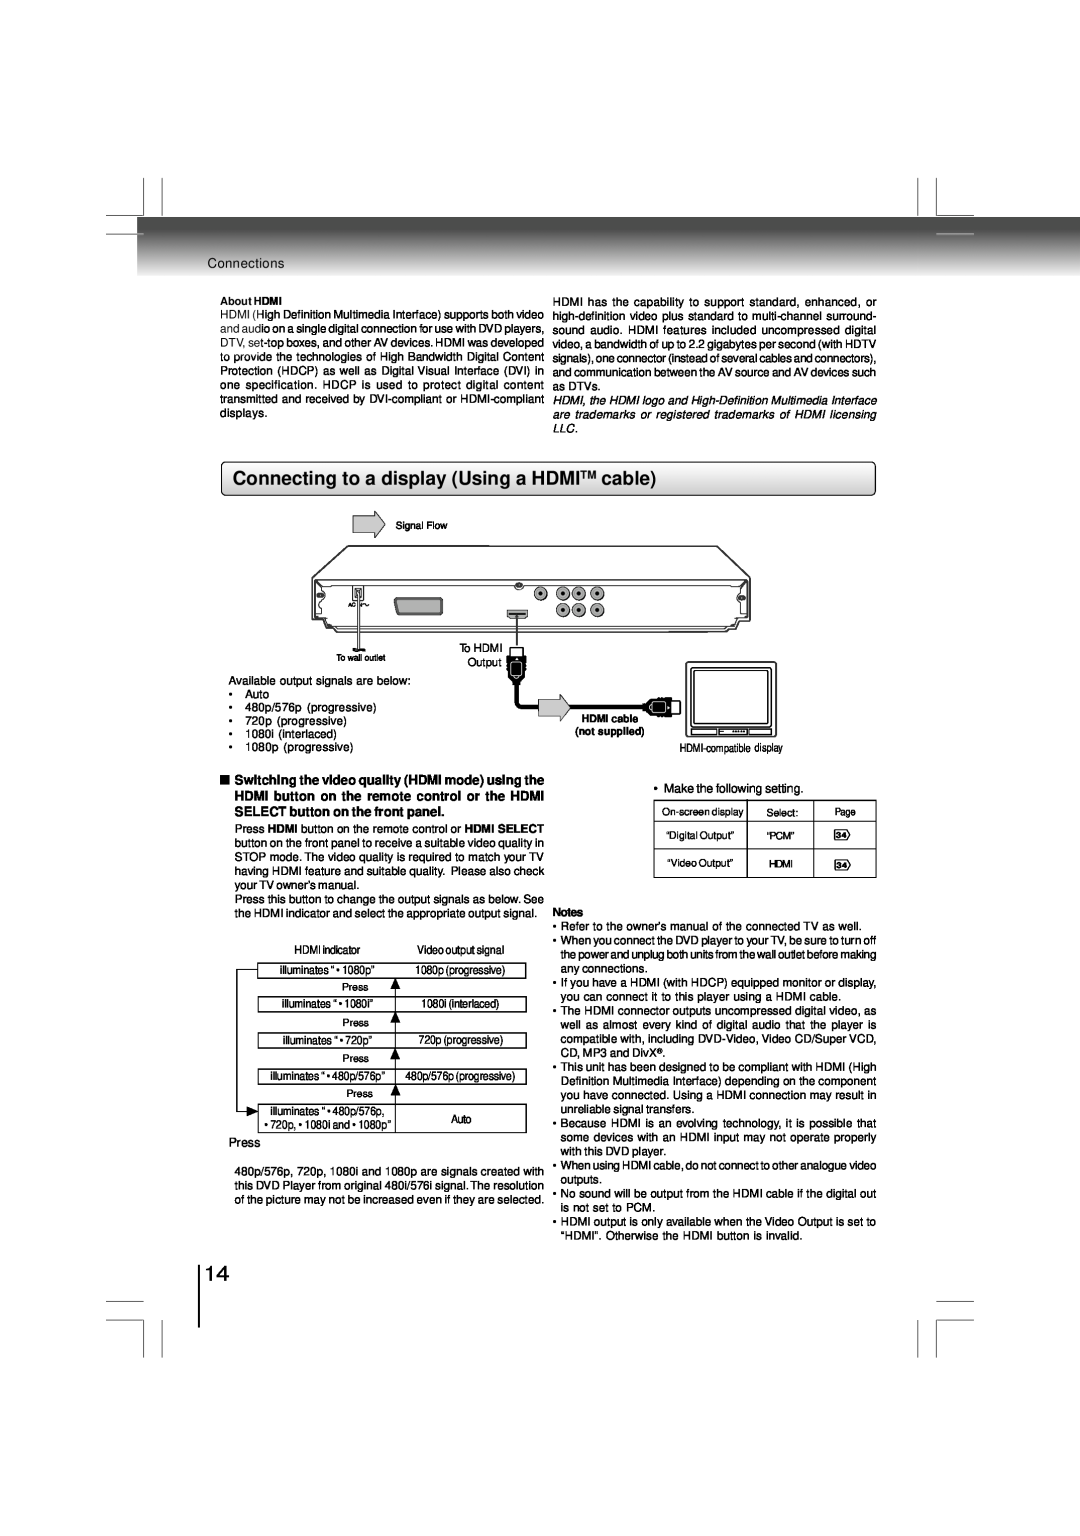 Toshiba SD-480EKE owner manual Connecting to a display Using a HDMITM cable, About HDMI, HDMI cable not supplied 